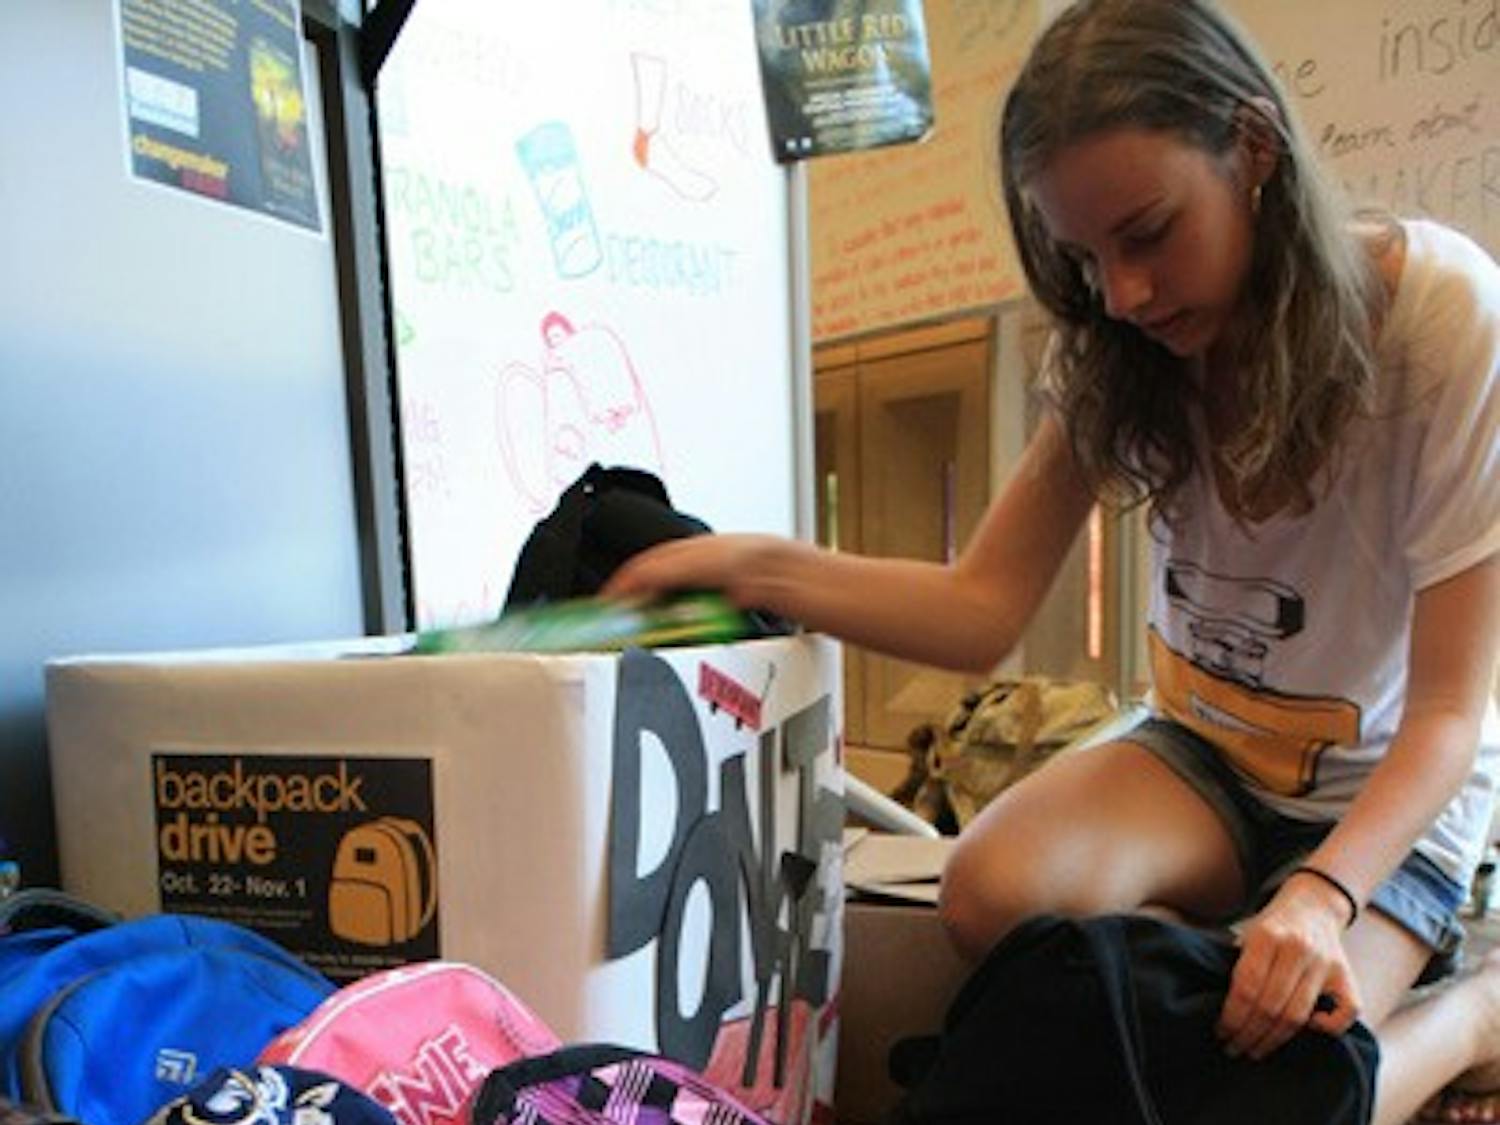 Biology sophomore Kristen Reynolds donates notebooks and other school supplies  to Changemaker Central’s backpack drive Thursday on the Tempe campus.  (Photo by Jessie Wardarski)